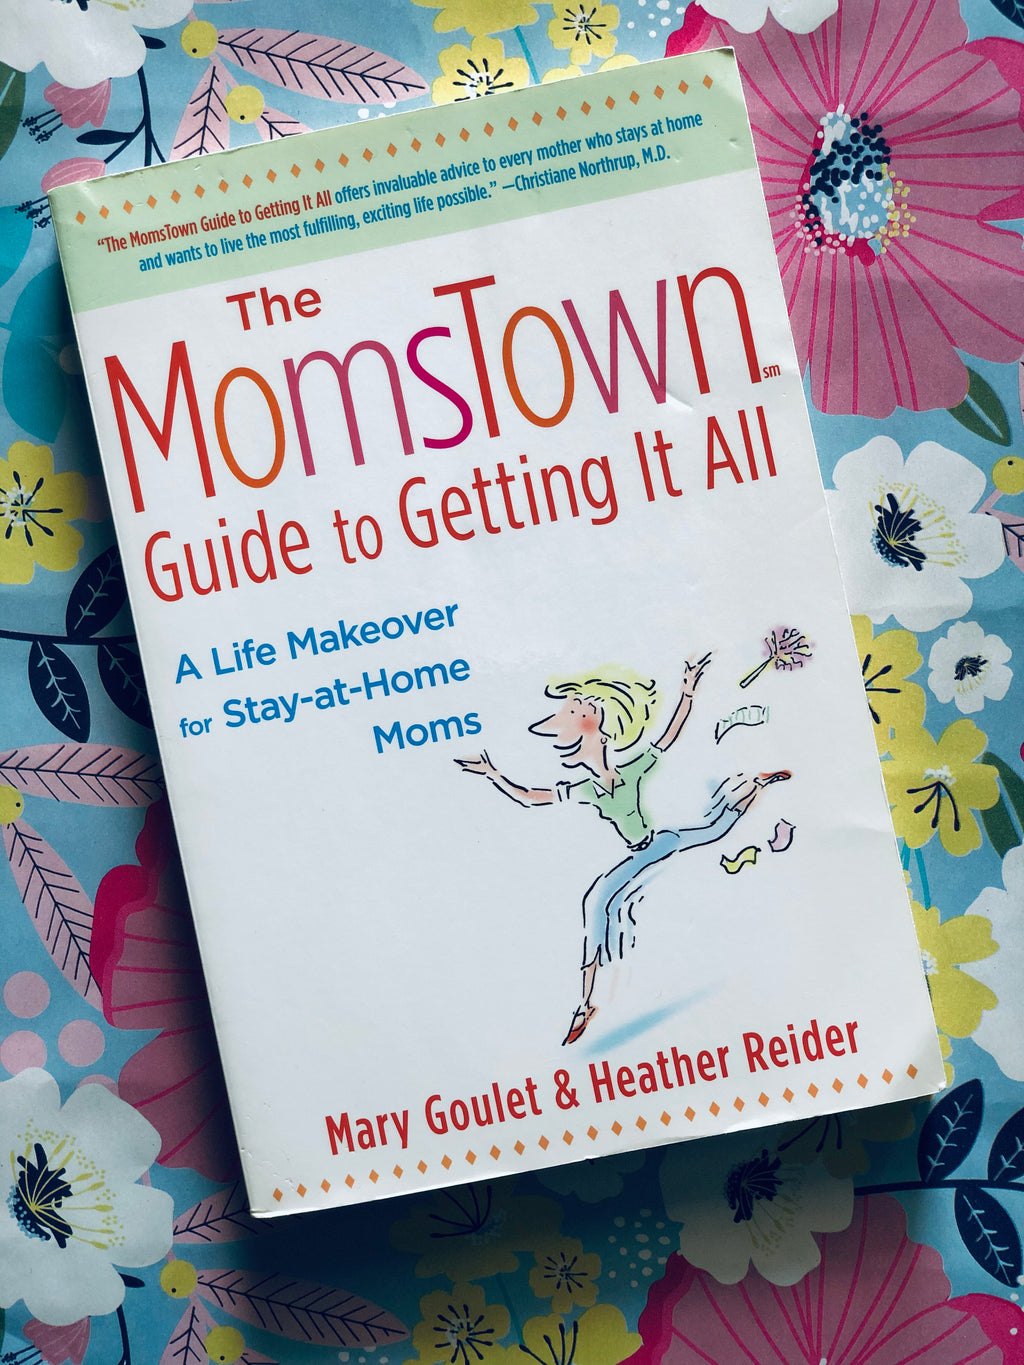 The Moms Town Guide to getting it All- By Mary Goblet & Heather Reider